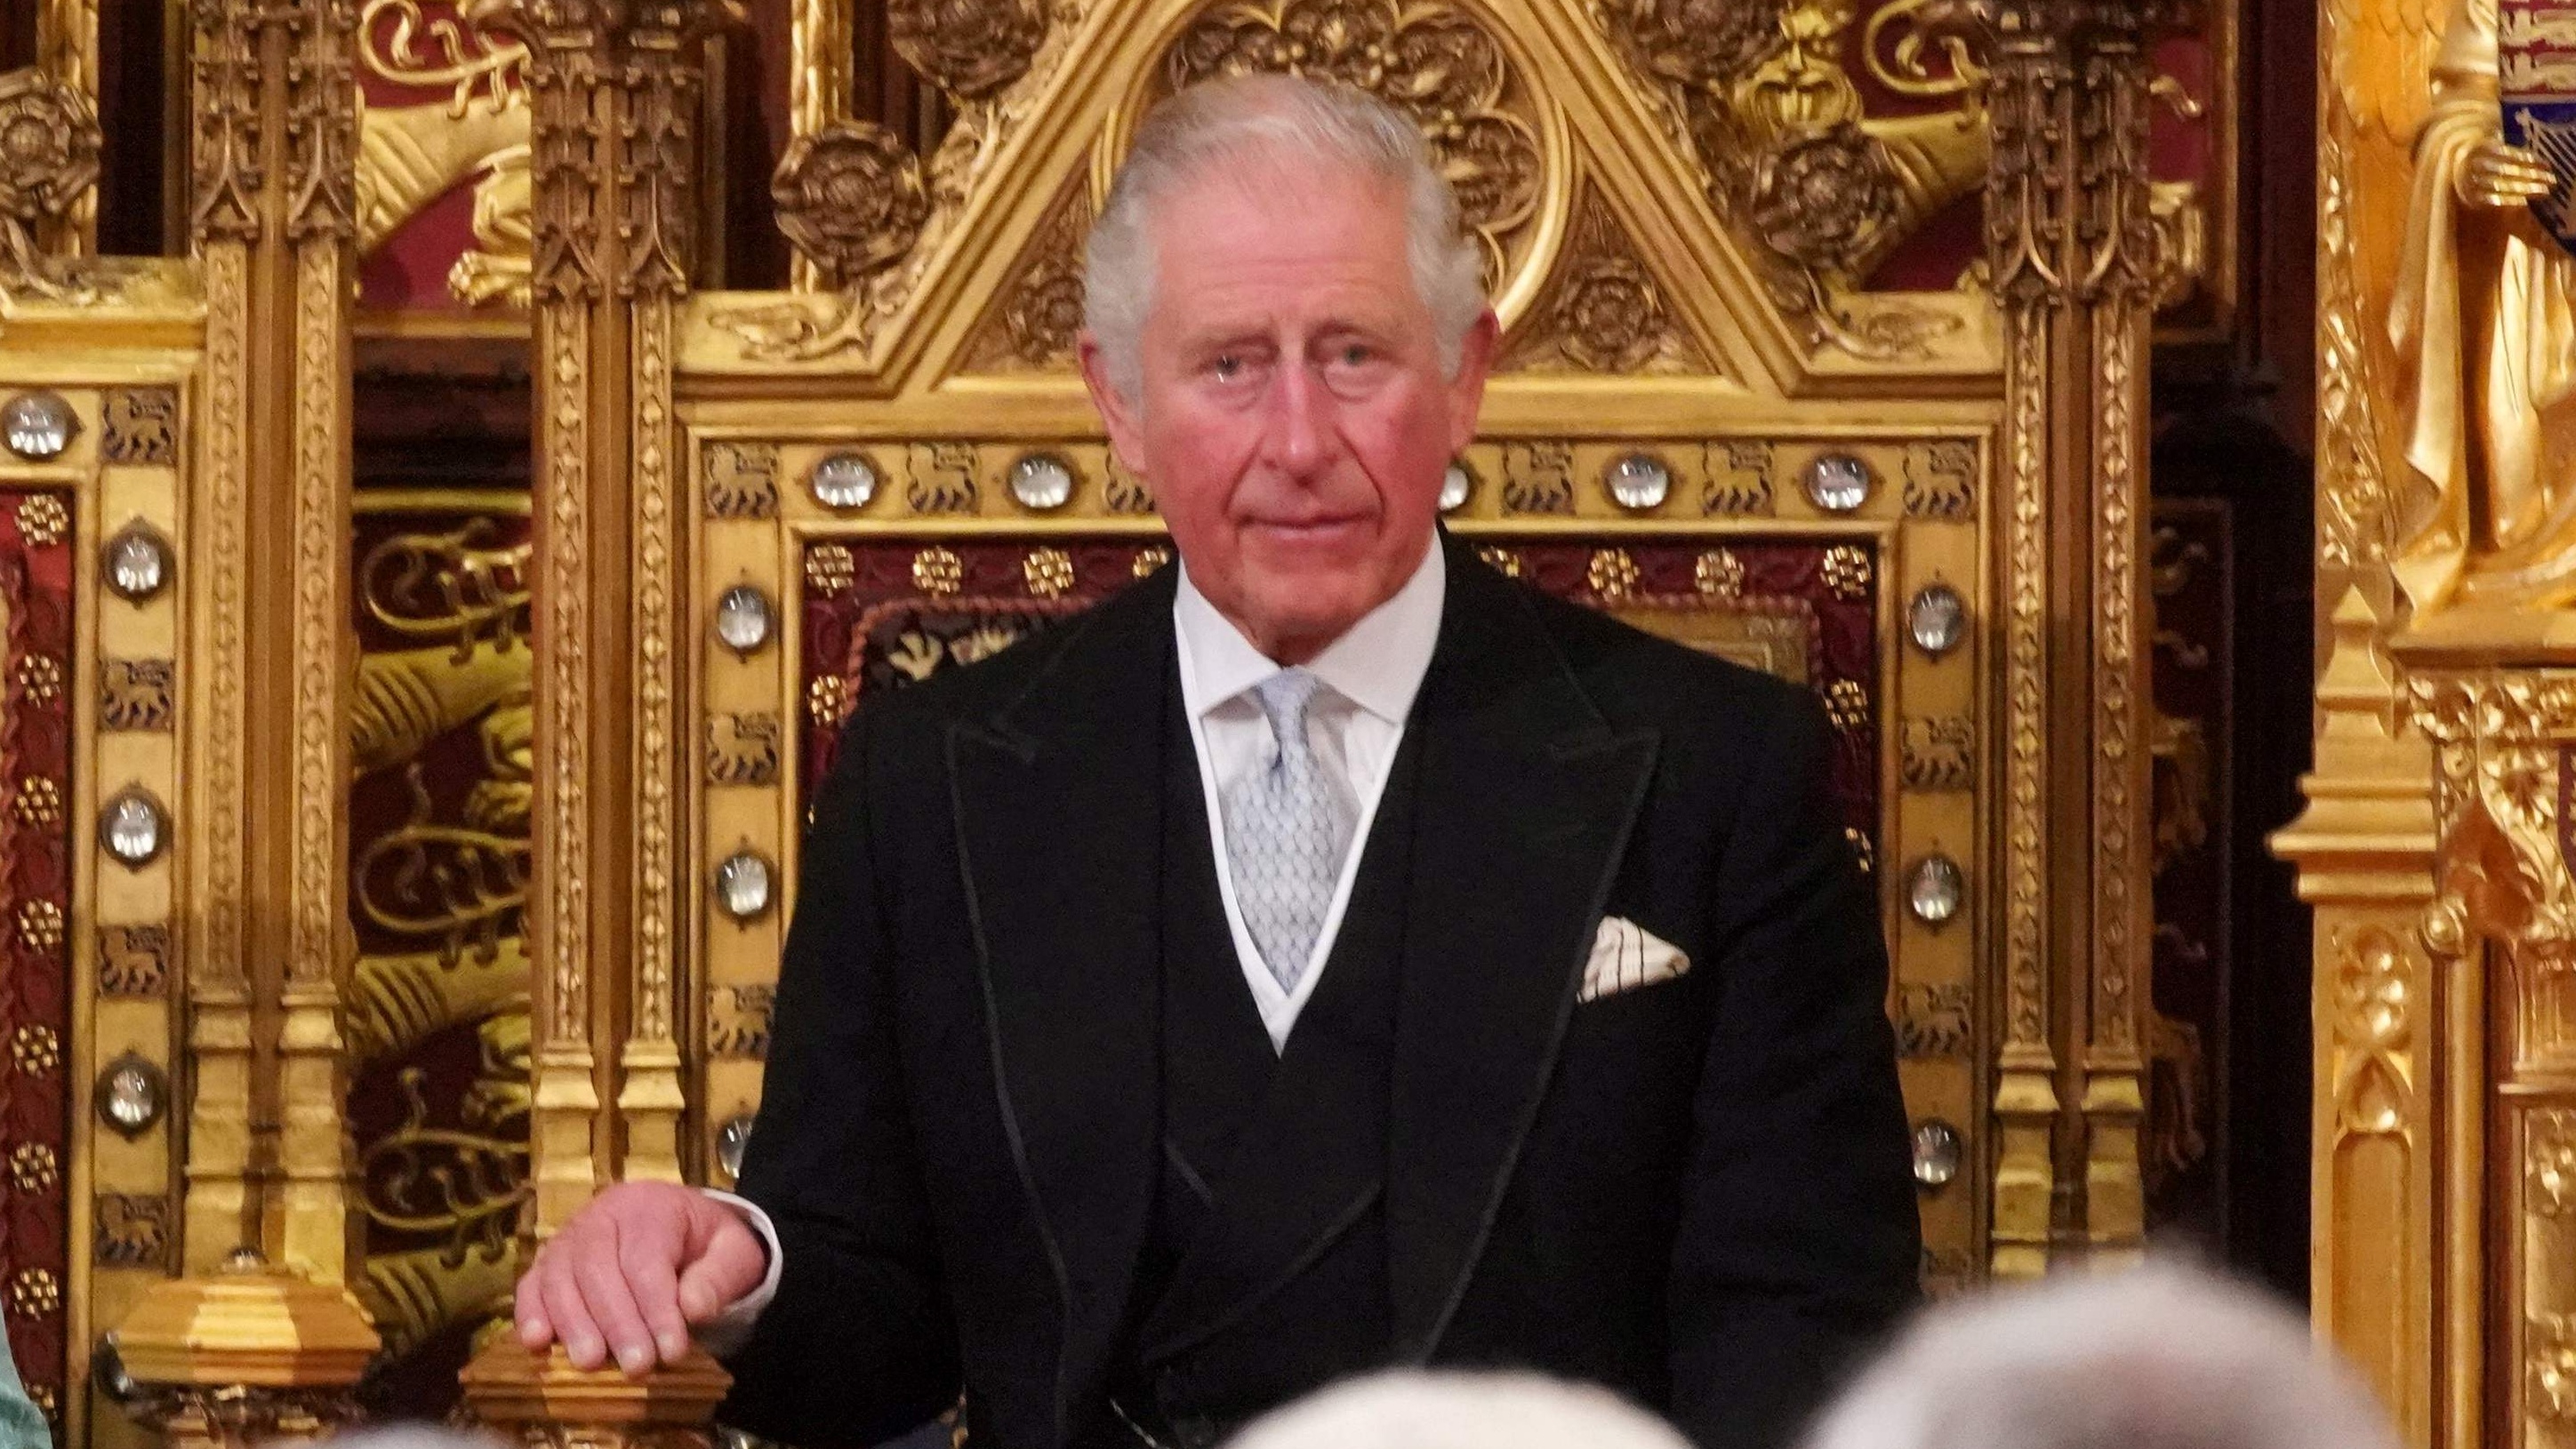 Royal Family website targeted in apparent Russian cyber attack TechRadar